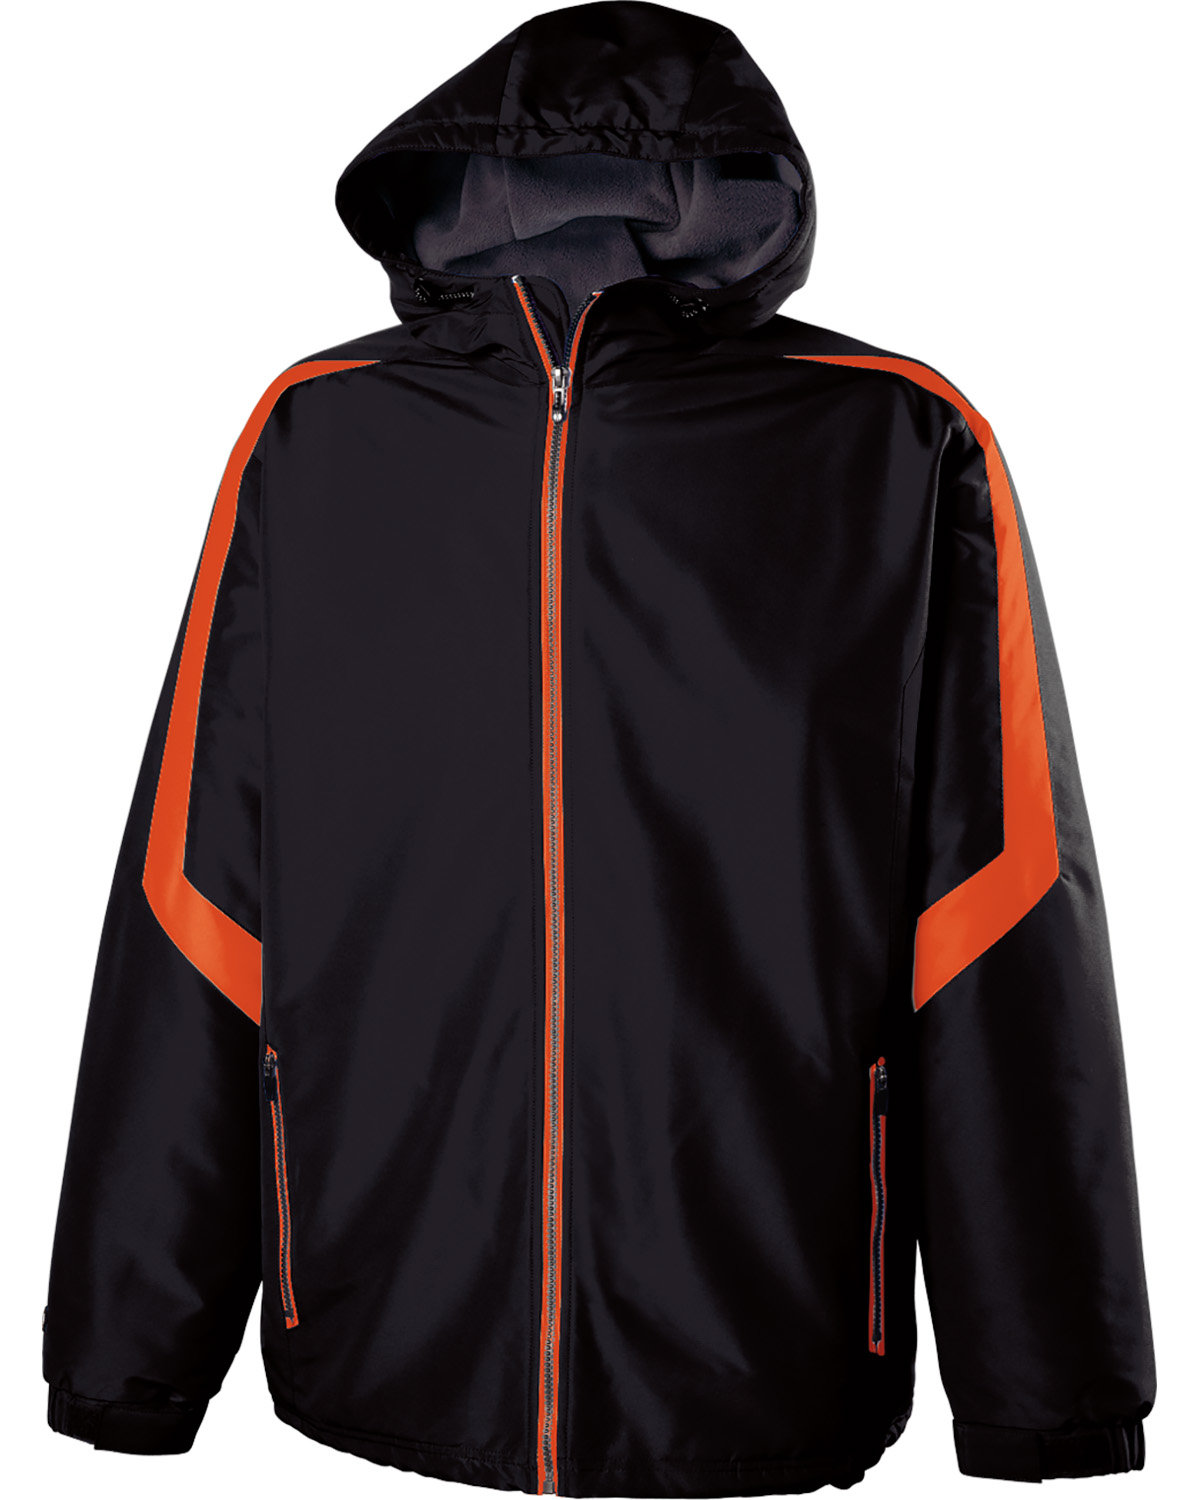 Adult Polyester Full Zip Charger Jacket-Holloway